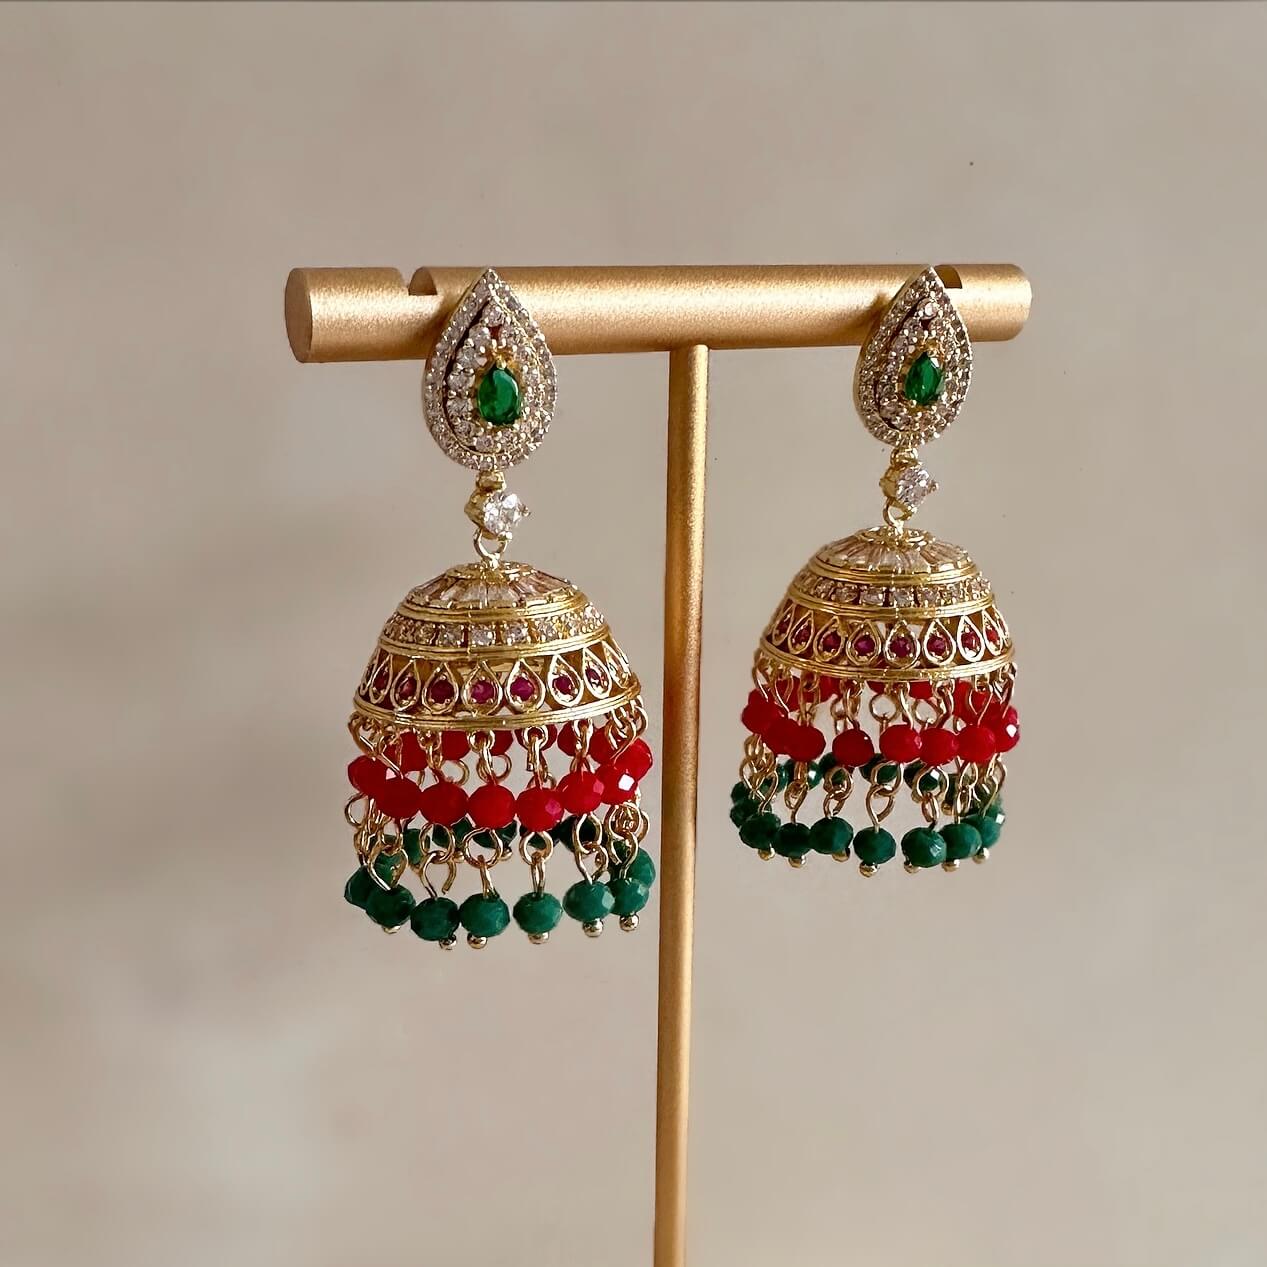 These Jhumki Earrings provide a timeless, traditional look with bright red and green hues. The intricate design is detailed with delicate crystal zirconia stones for subtle sparkle. Perfect for special occasions.